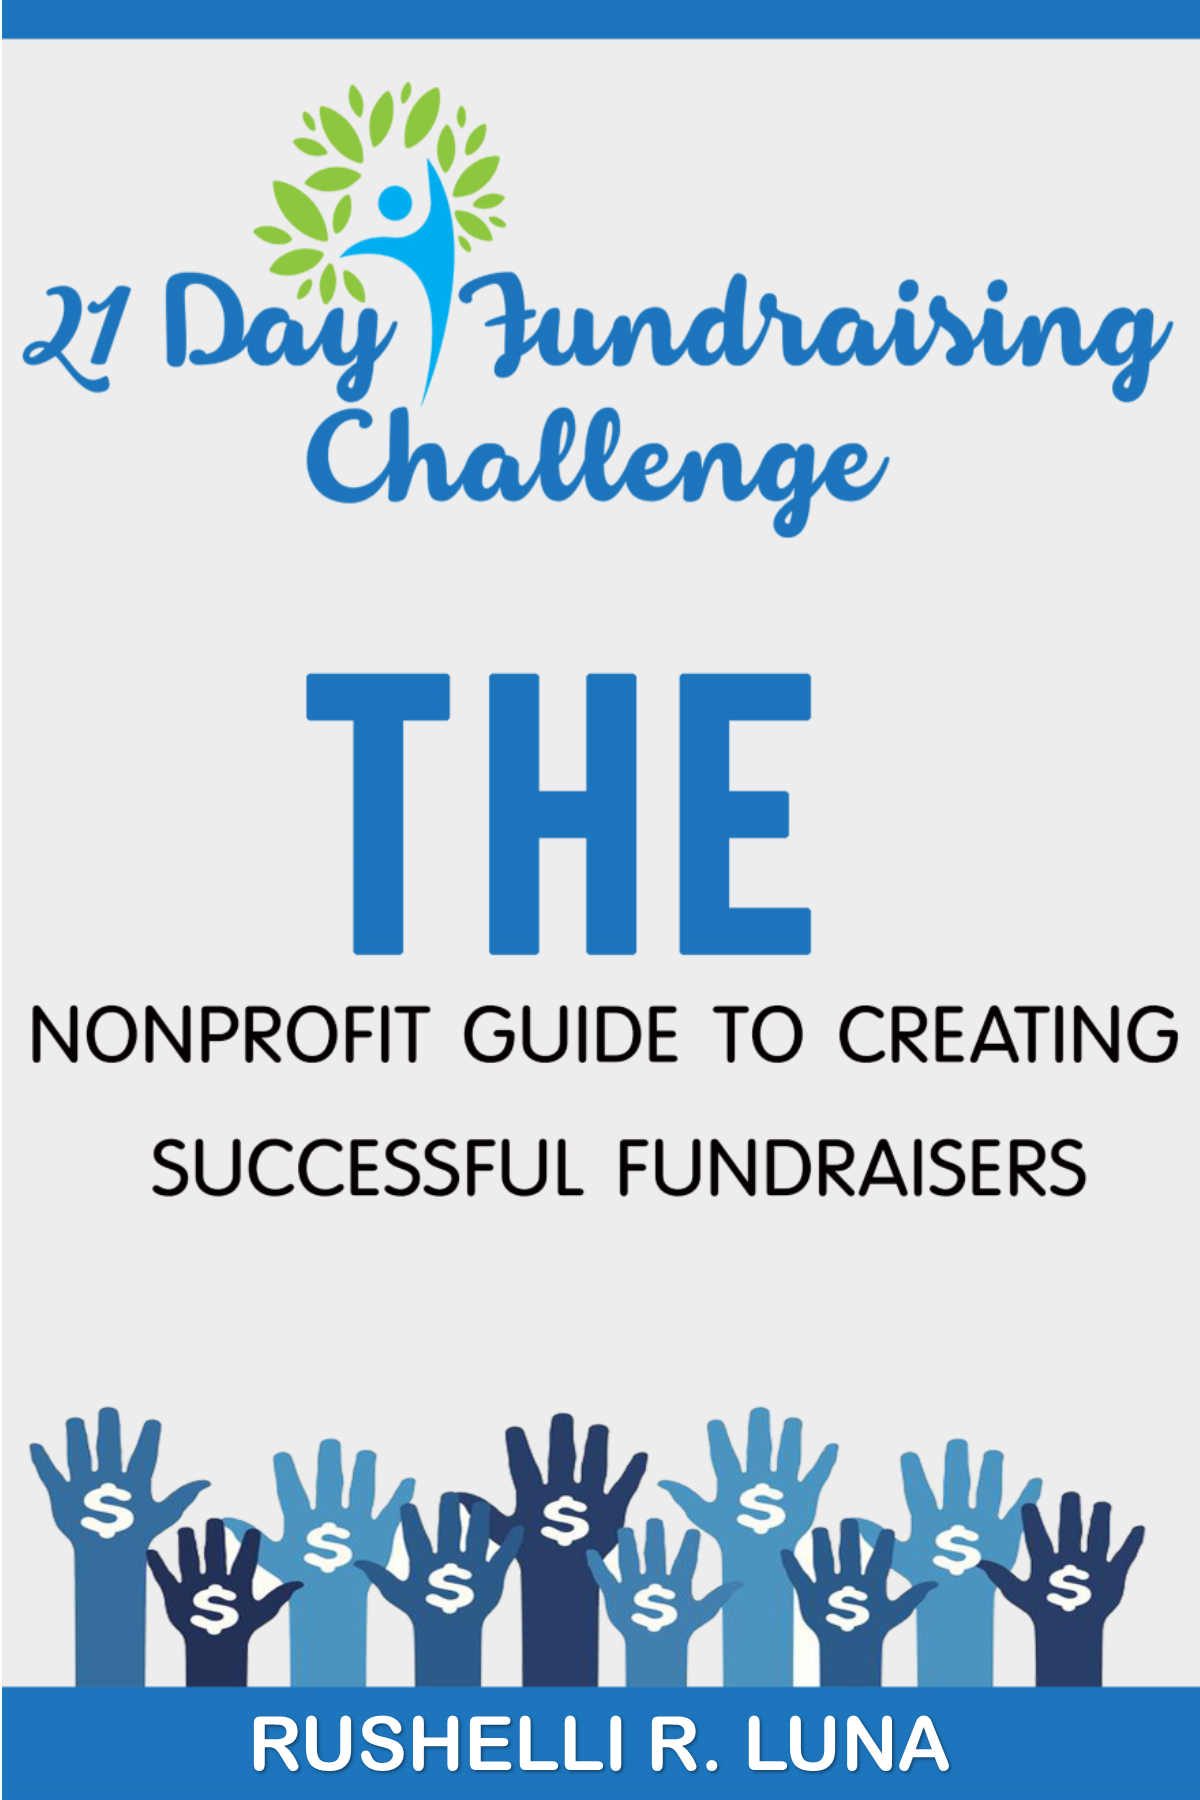 21 Day Fundraising Challenge